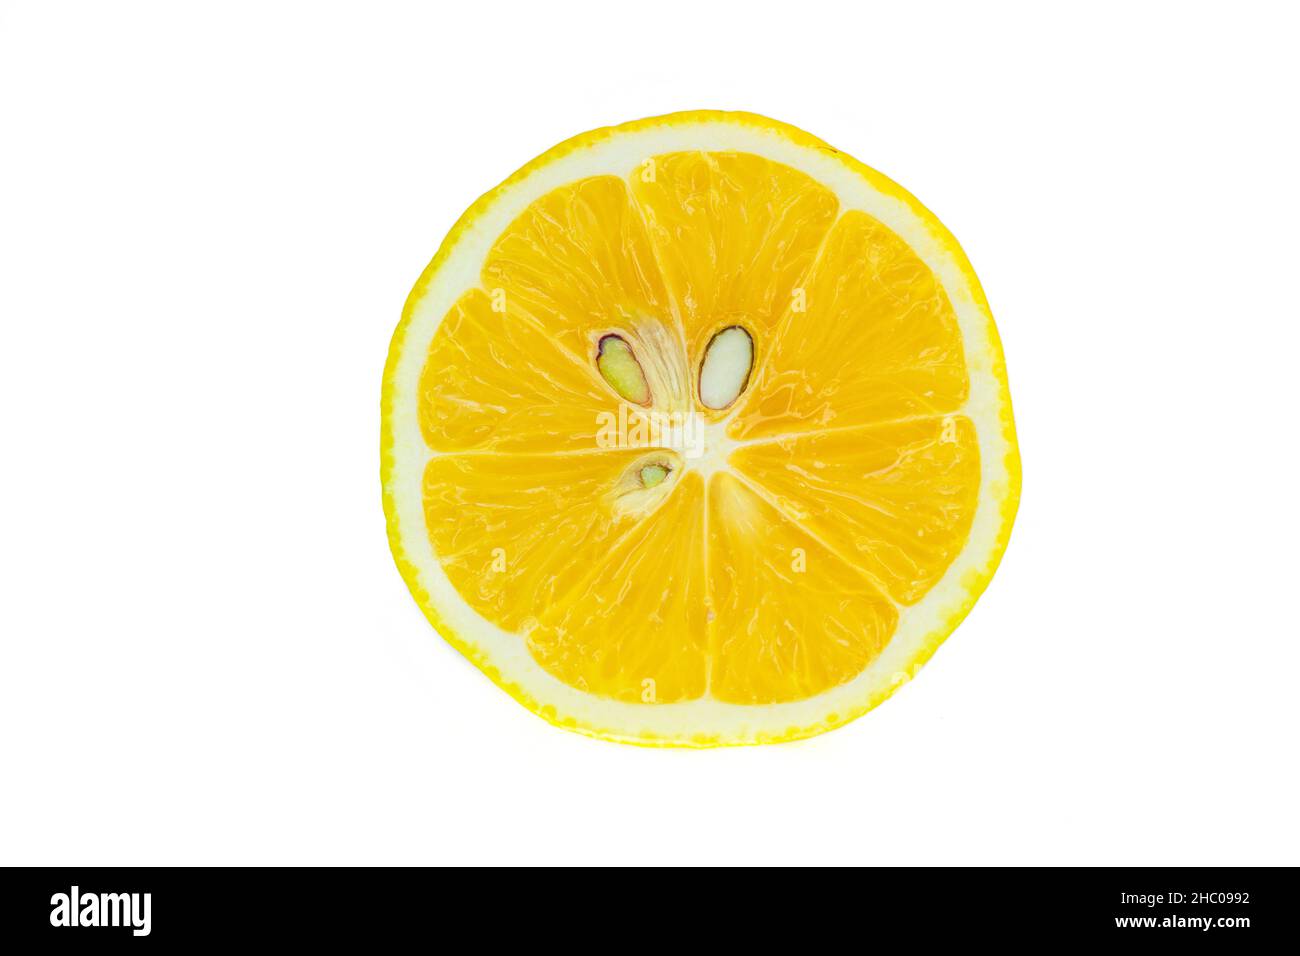 Lemon slice, top view of lemon slice isolated on white background. Citrus fruit with clipping path. Stock Photo